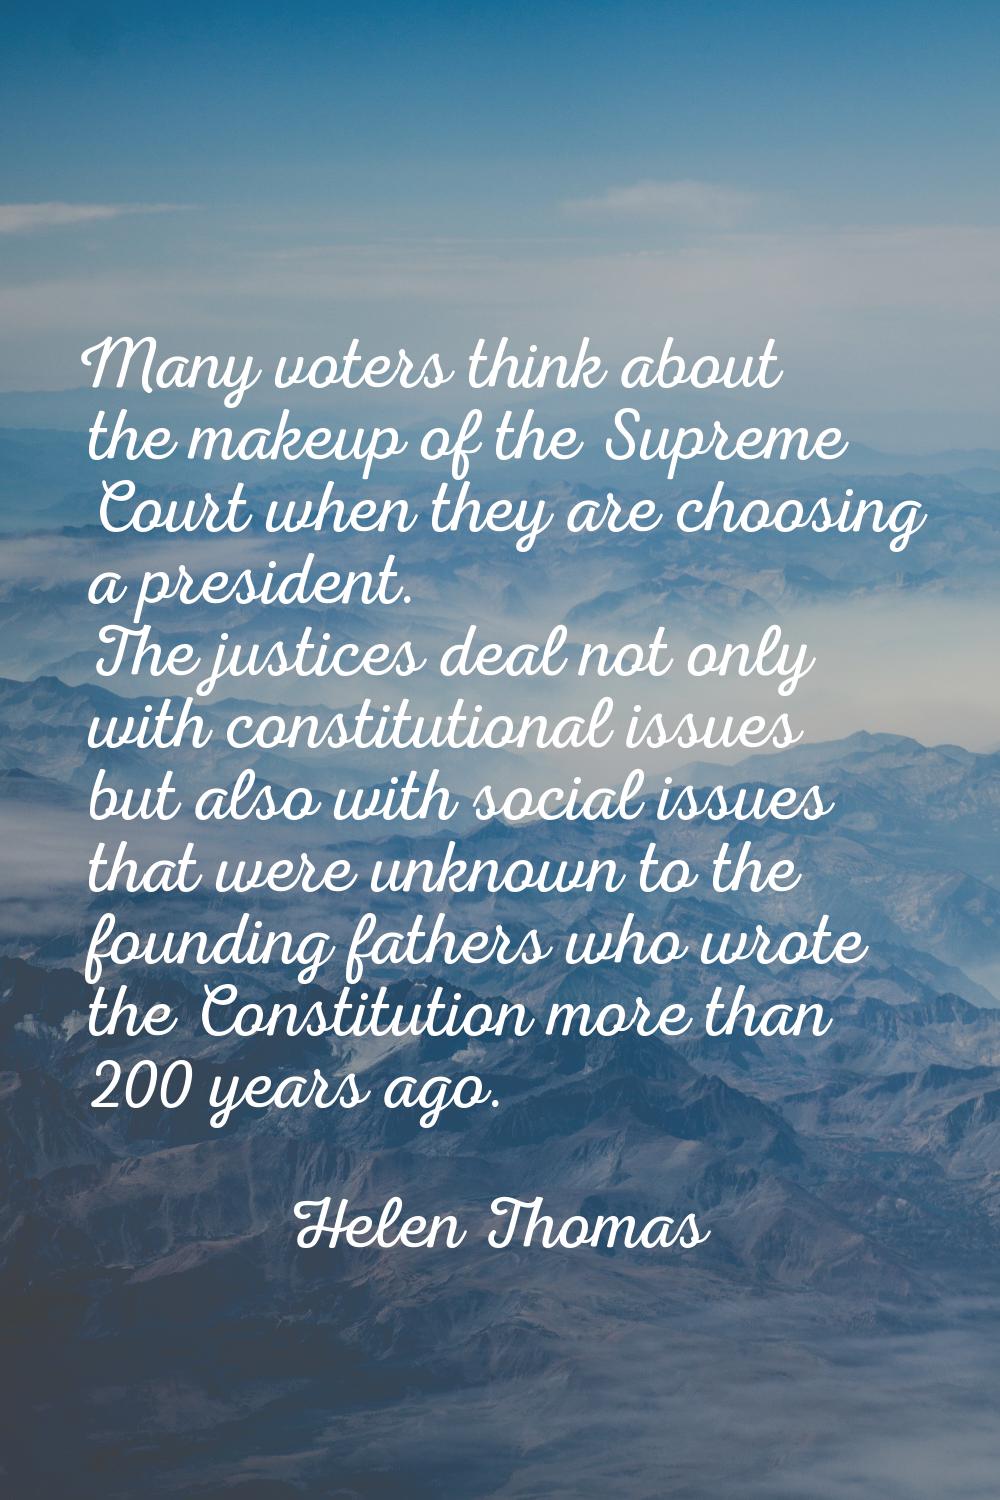 Many voters think about the makeup of the Supreme Court when they are choosing a president. The jus